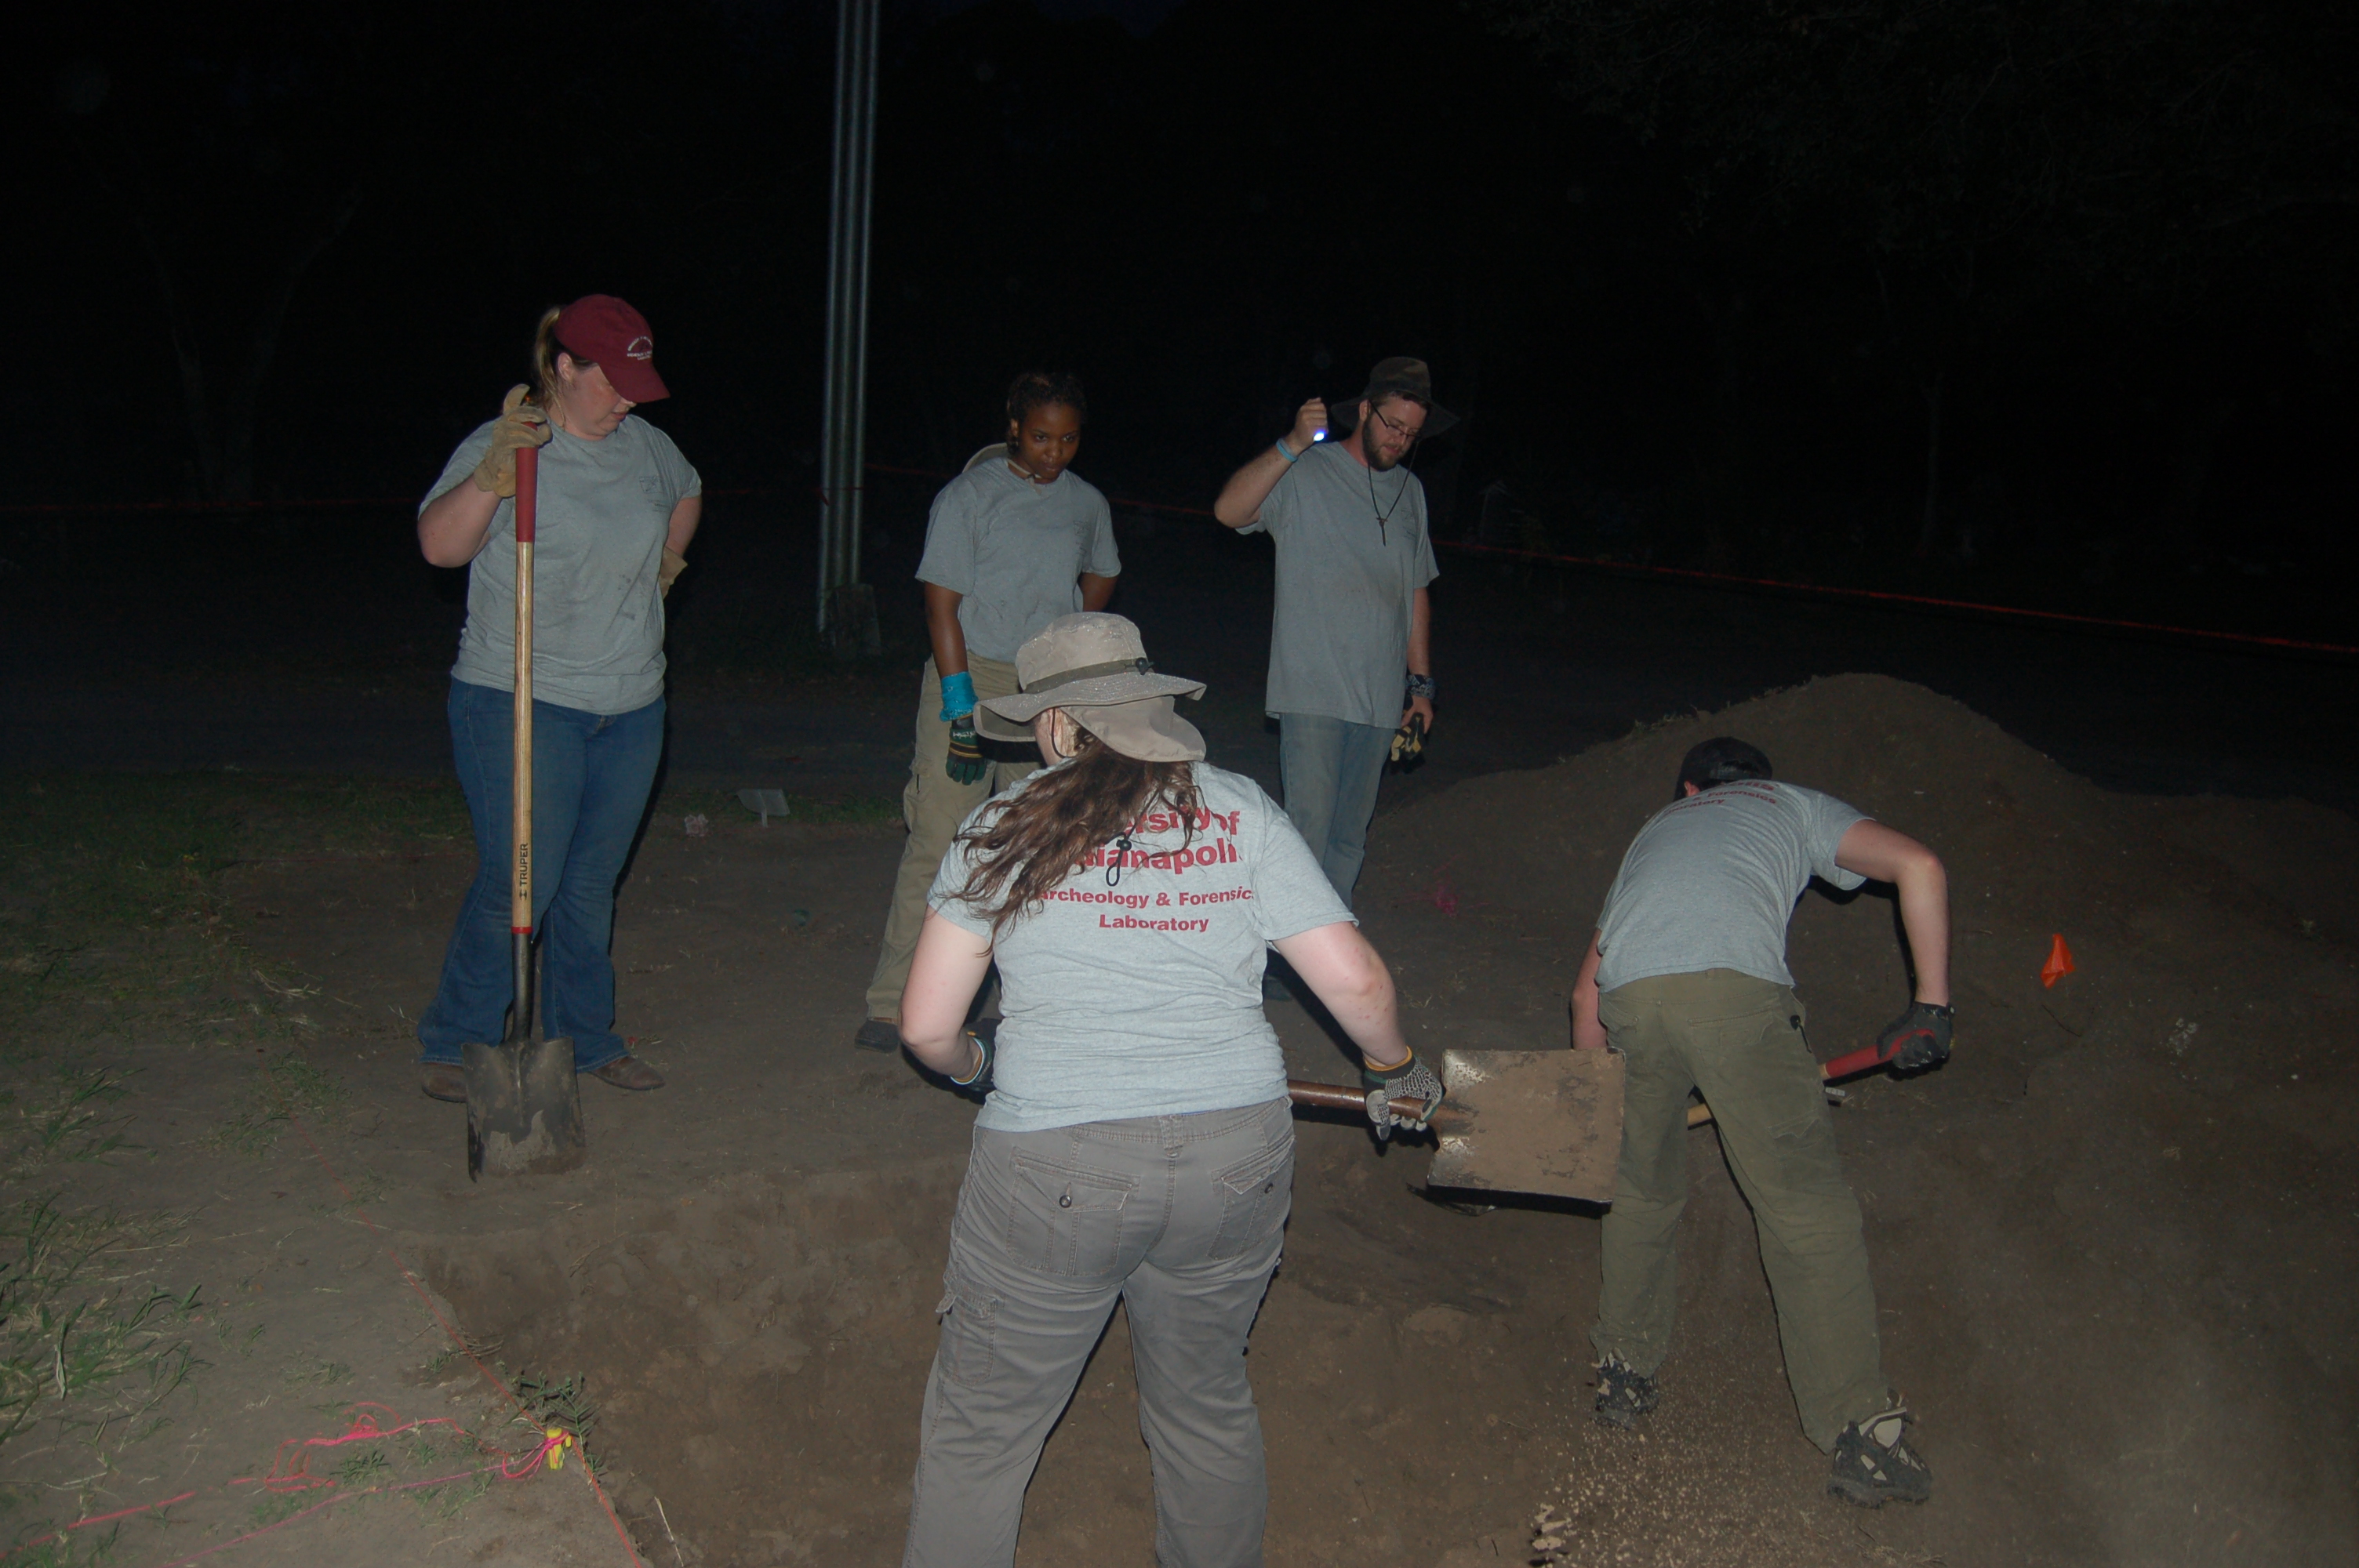 Team members digging with shovels in the dark